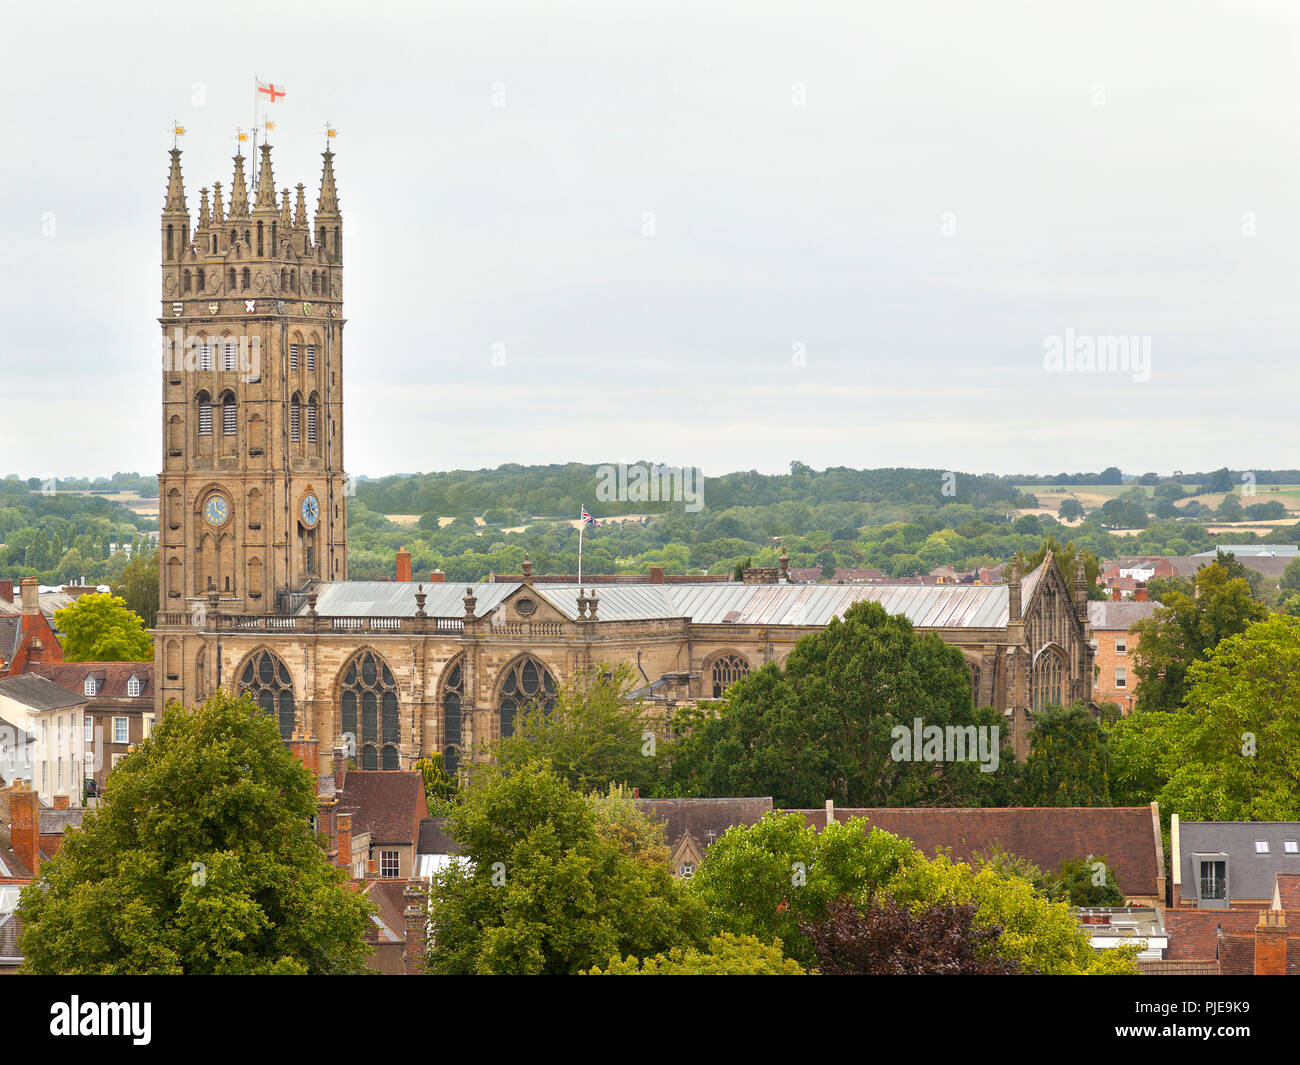 The Collegiate Church of St Mary, a Church of England parish church in the town of Warwick, England Stock Photo